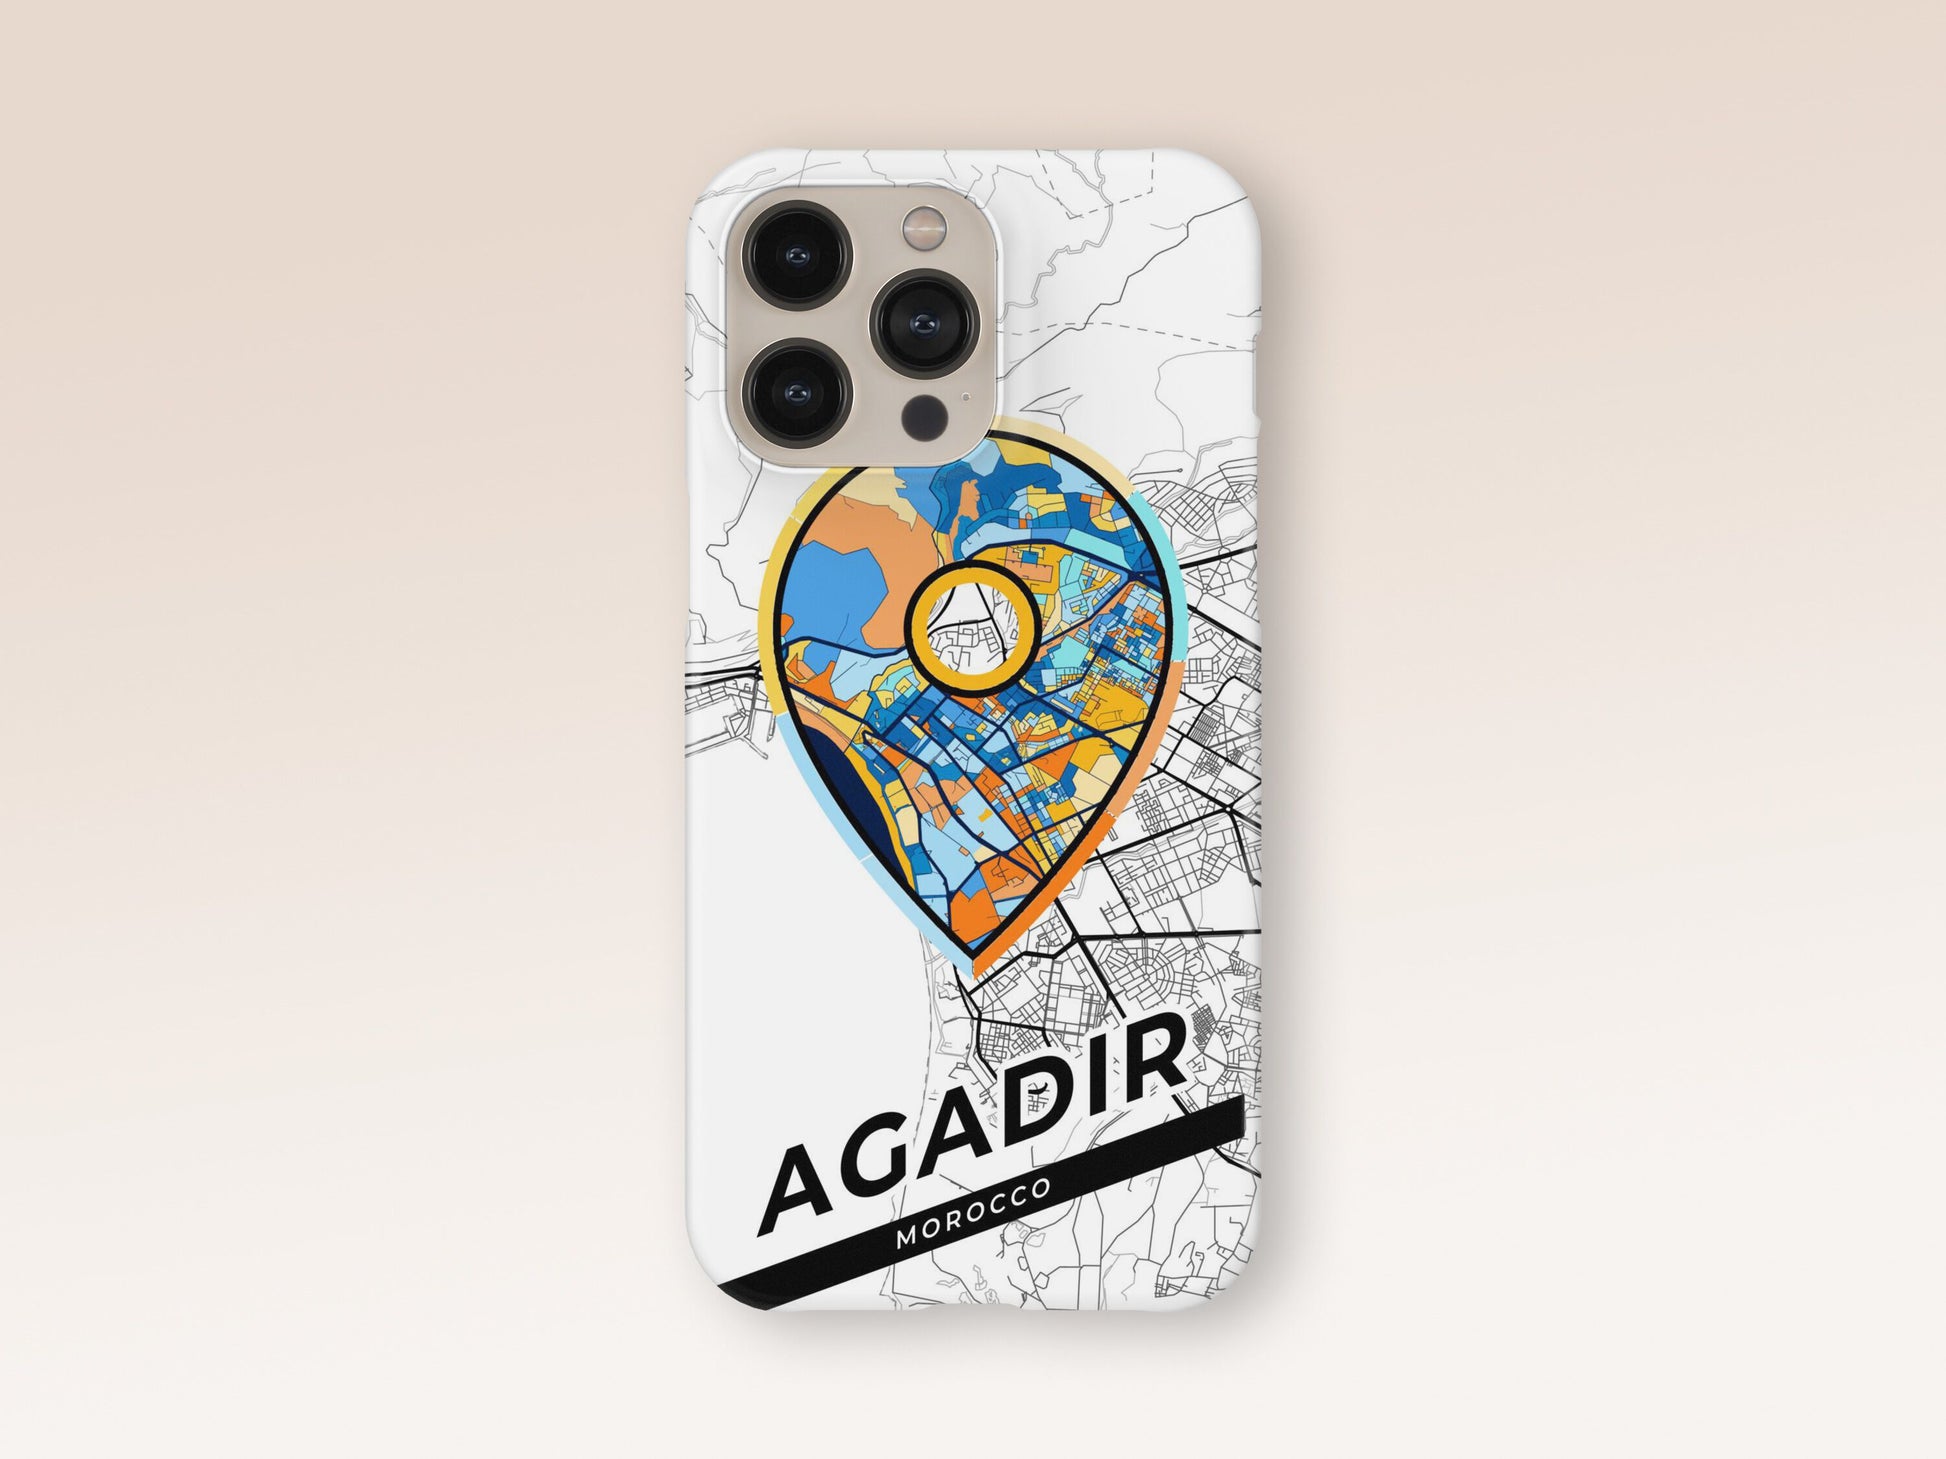 Agadir Morocco slim phone case with colorful icon. Birthday, wedding or housewarming gift. Couple match cases. 1